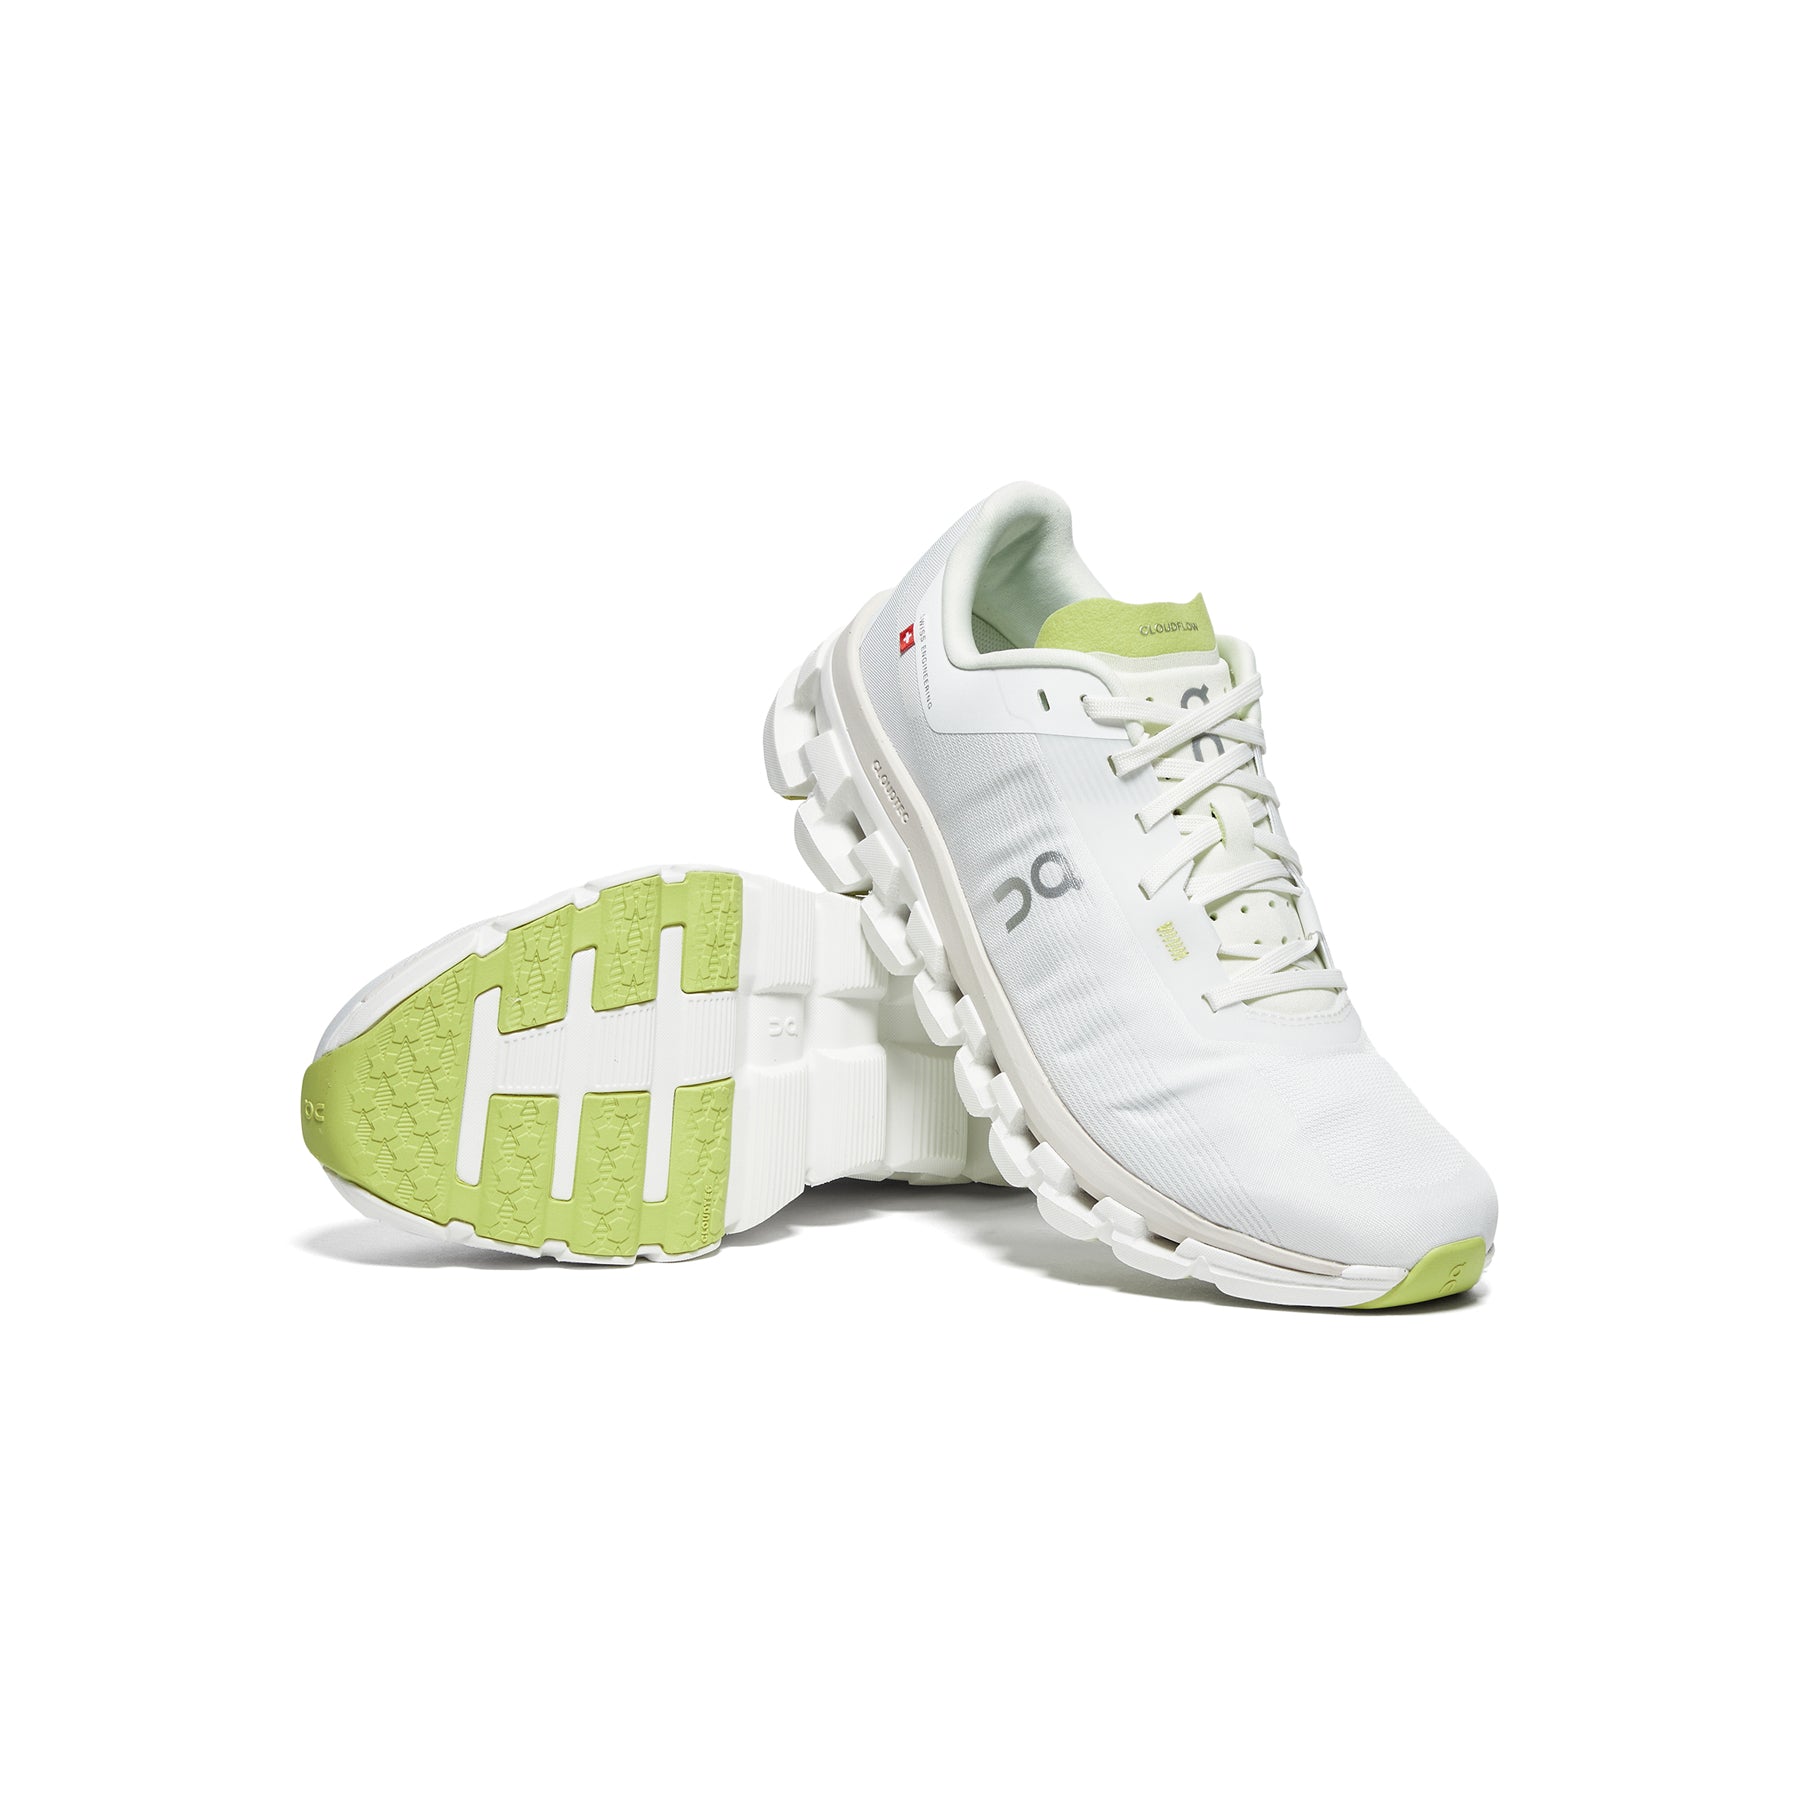 On Womens Cloudflow 4 (White/Sand) – Concepts